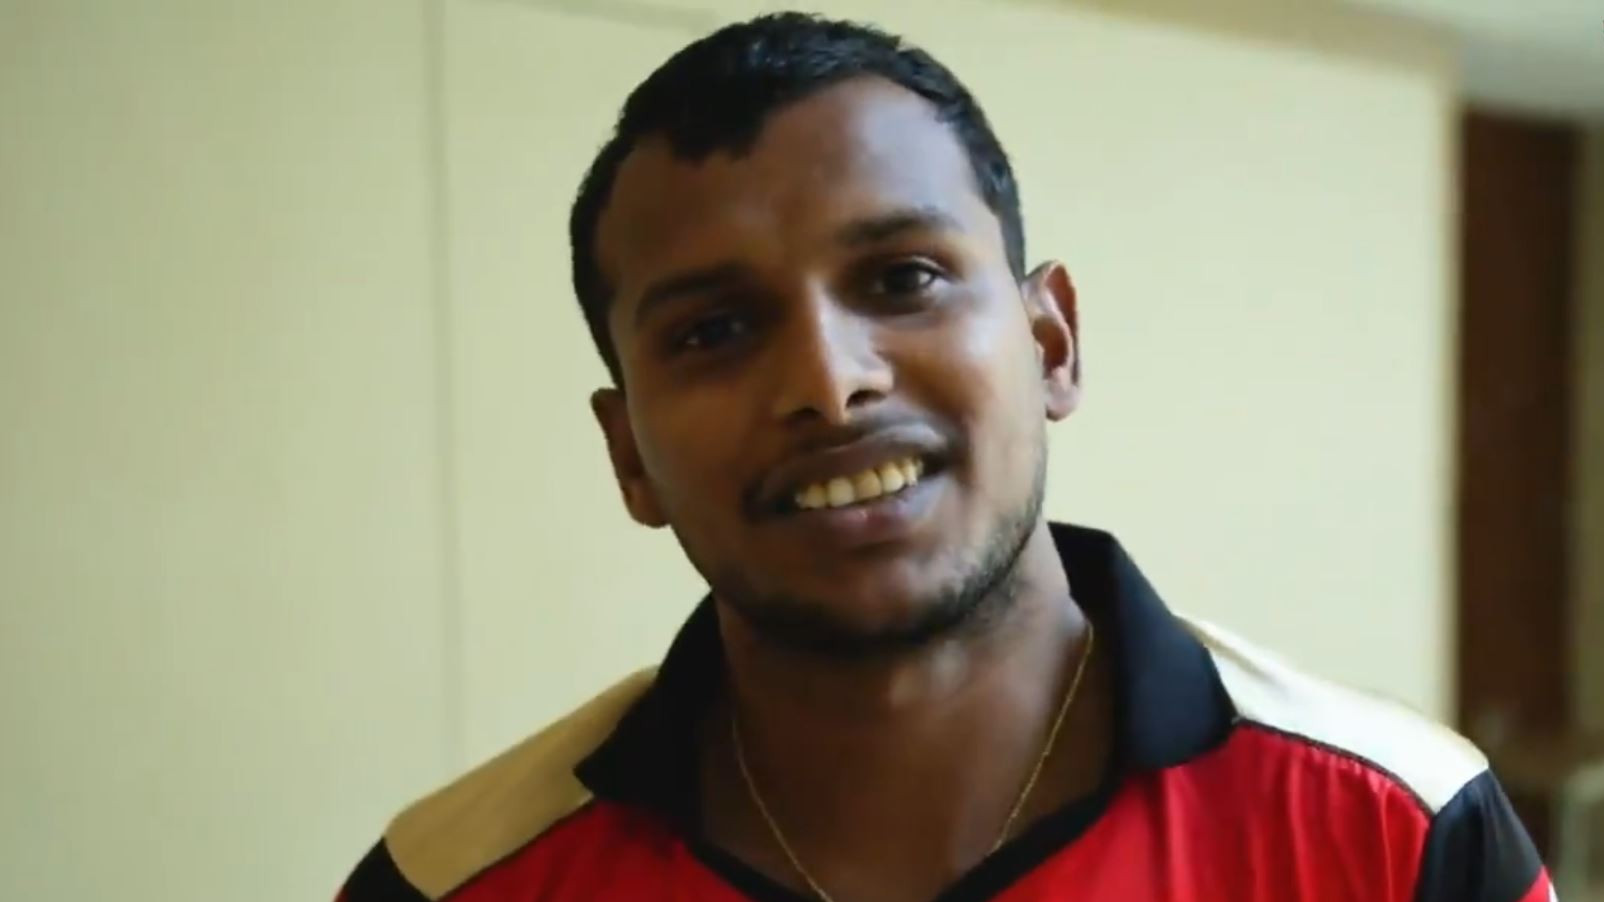 IPL 2021: WATCH- “I have to undergo knee surgery and will miss this season,” says T Natarajan 